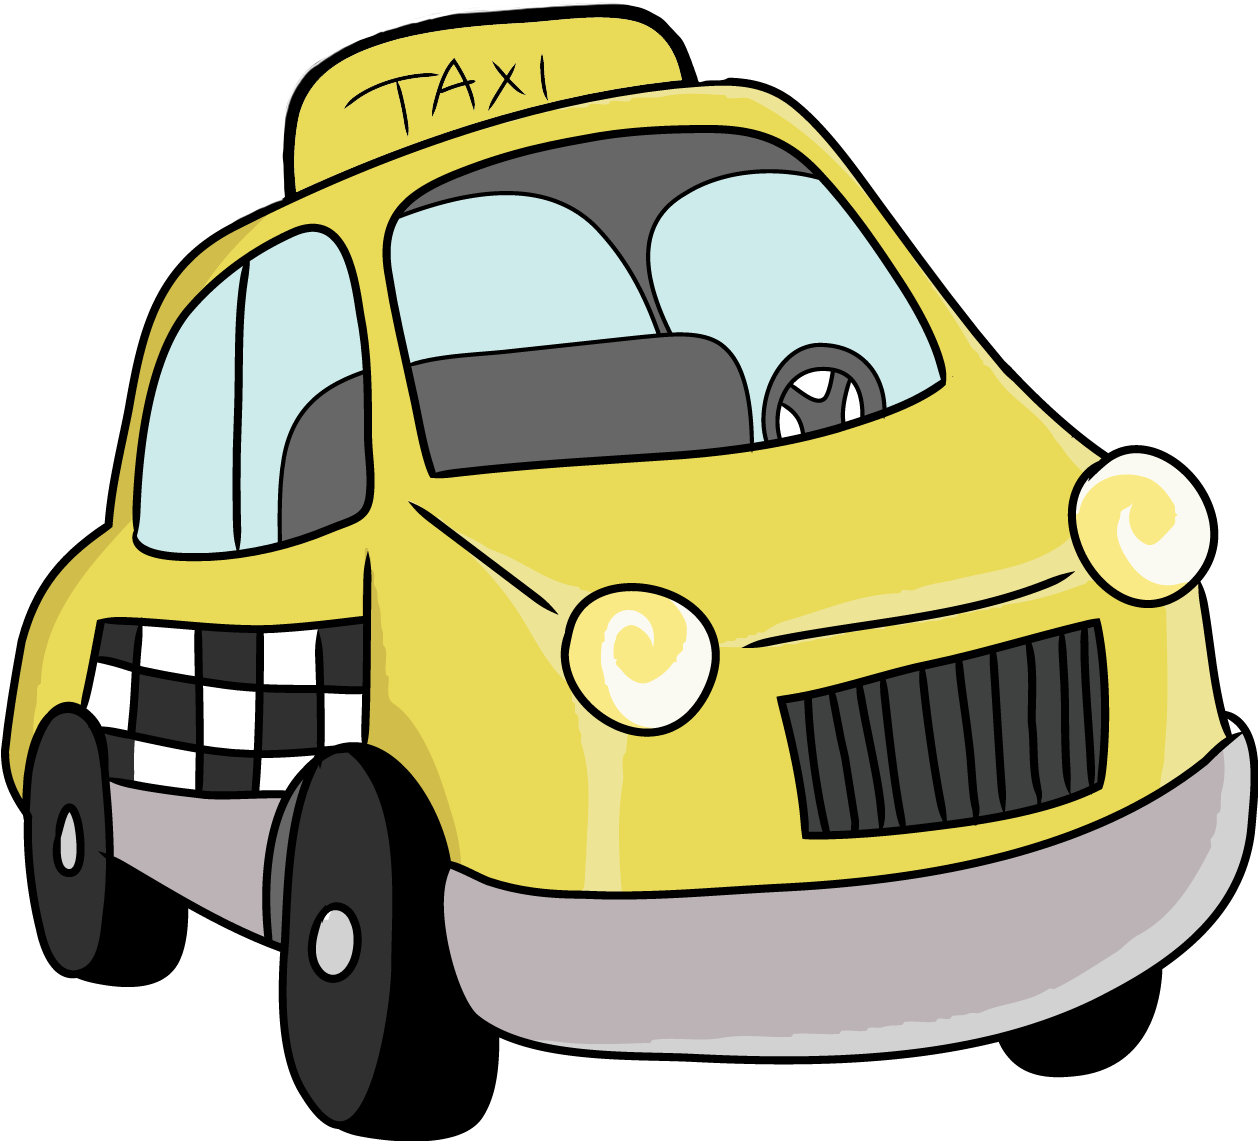 Free To Use Public Domain Cars Clip Art - Taxi Clipart Transparent (1257x1167)